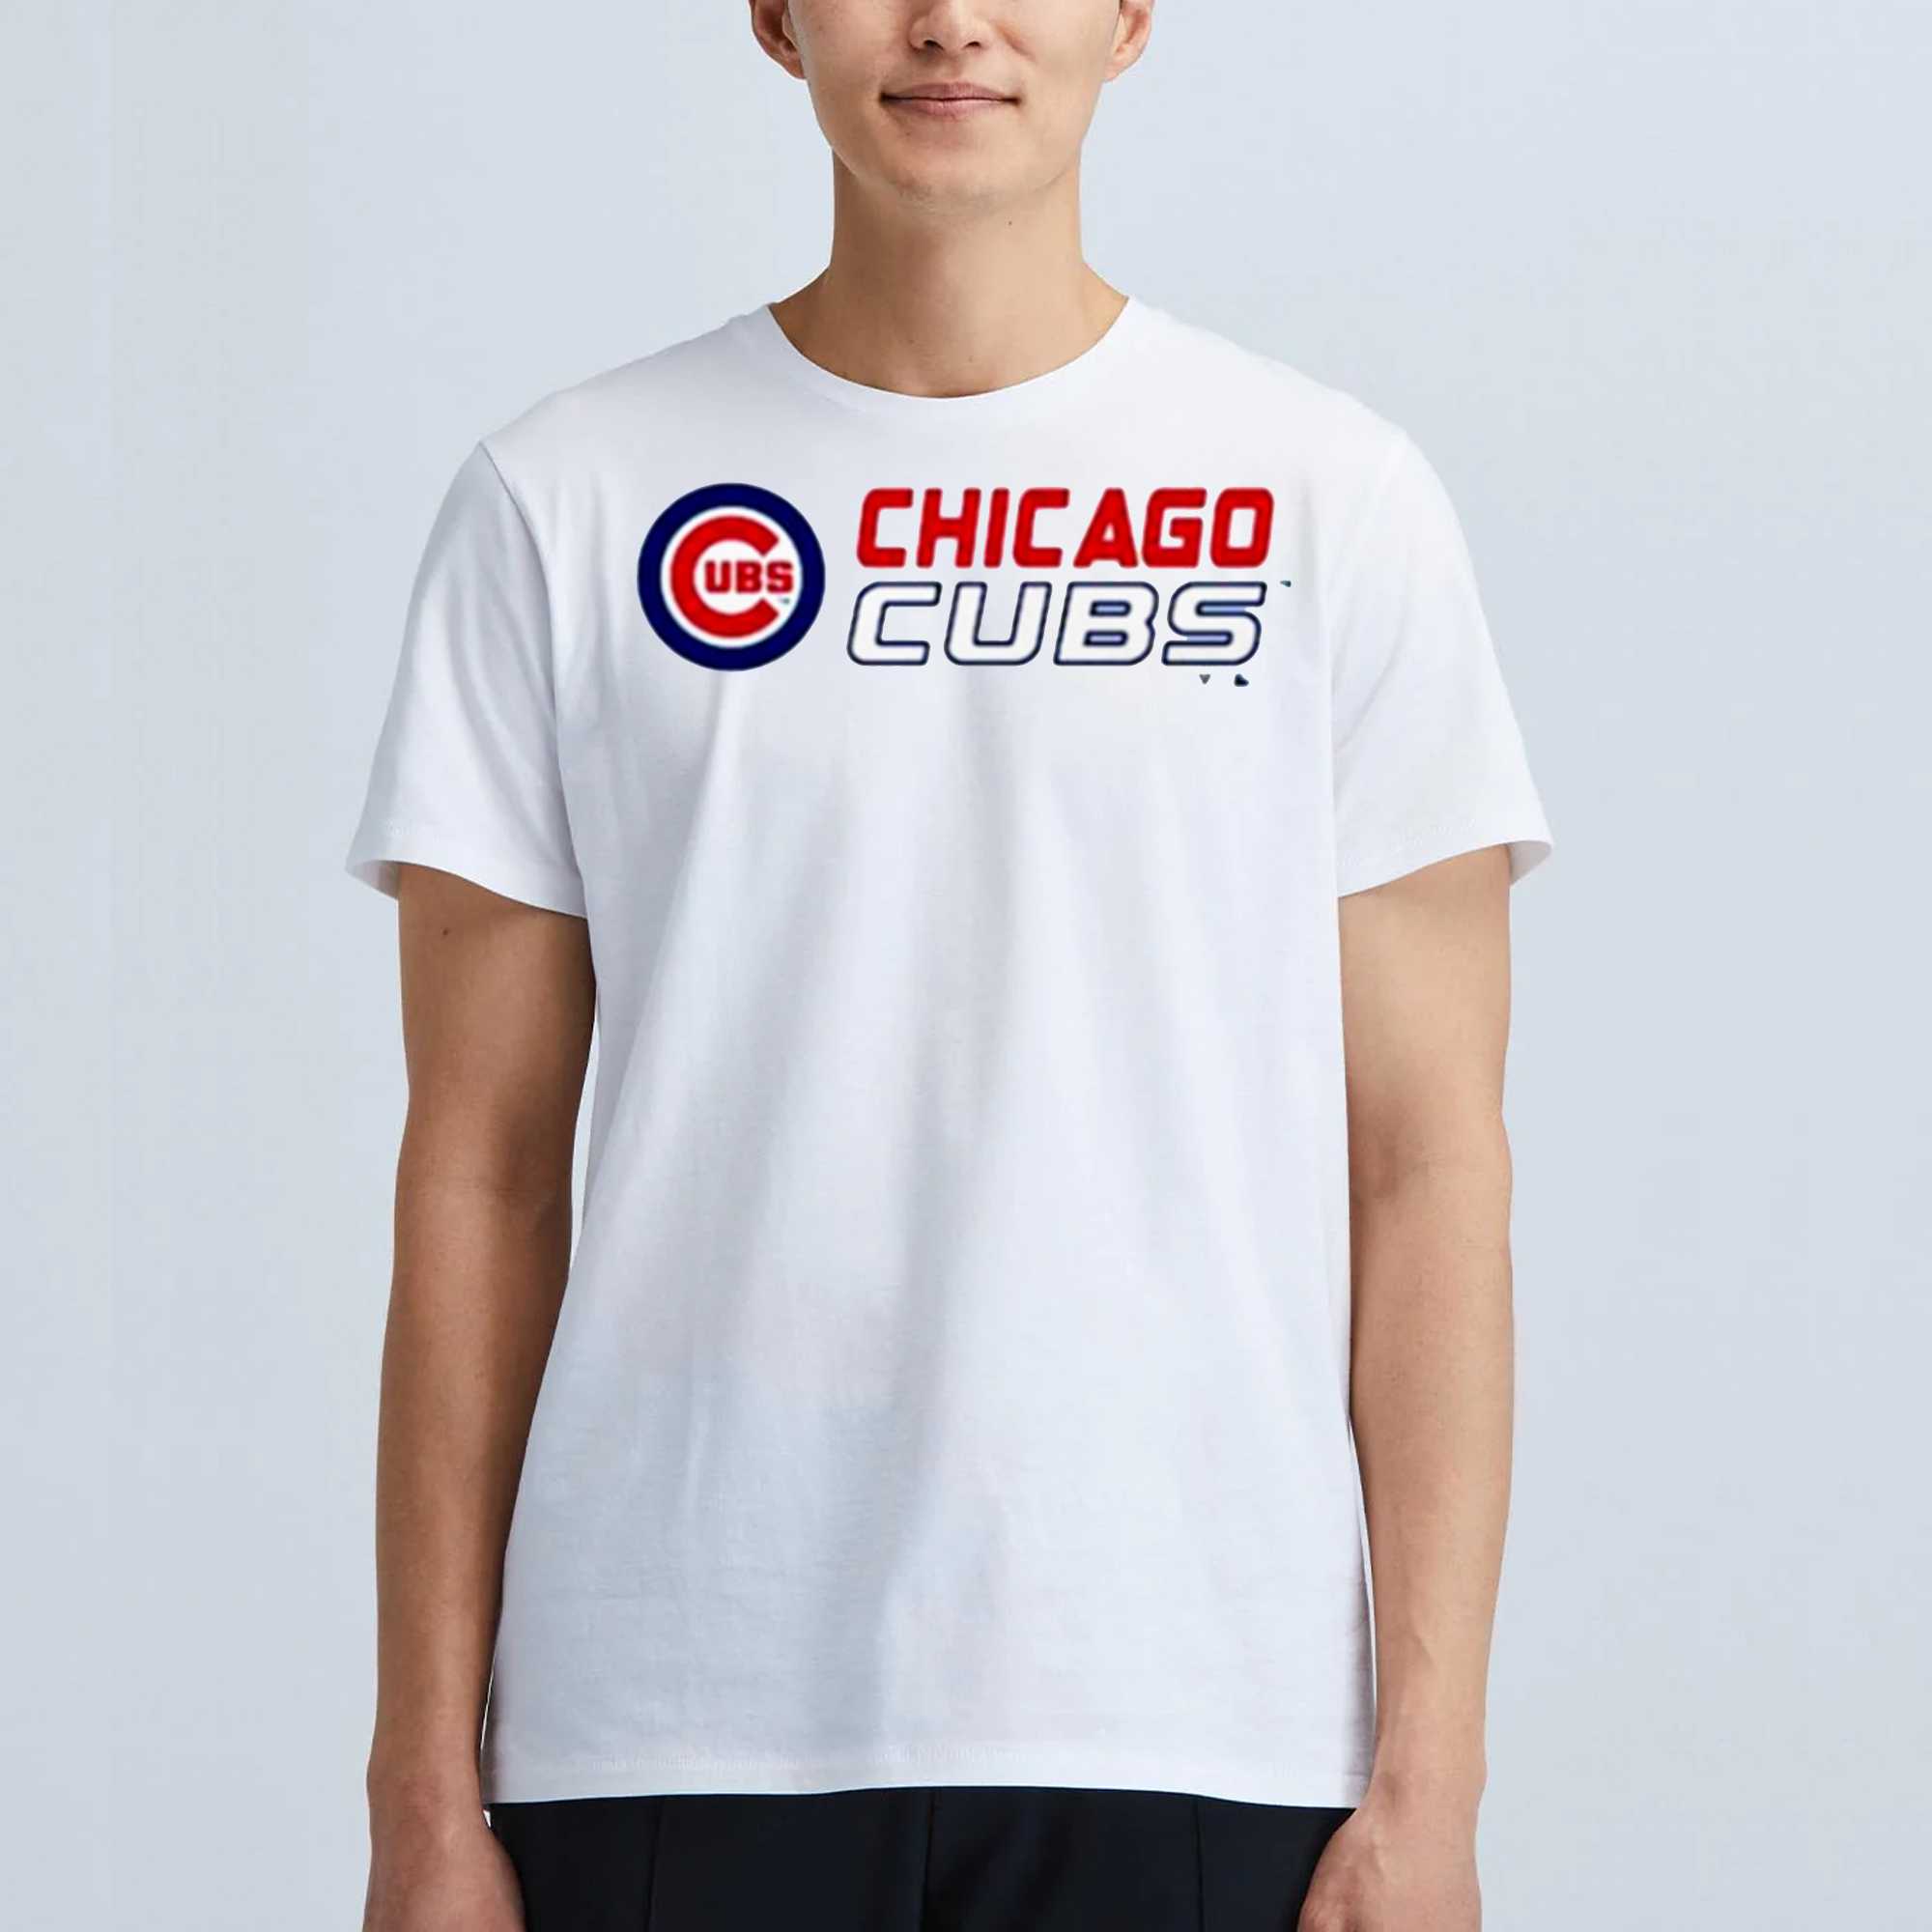 Chicago Cubs Levelwear Birch Chase Shirt - Shibtee Clothing